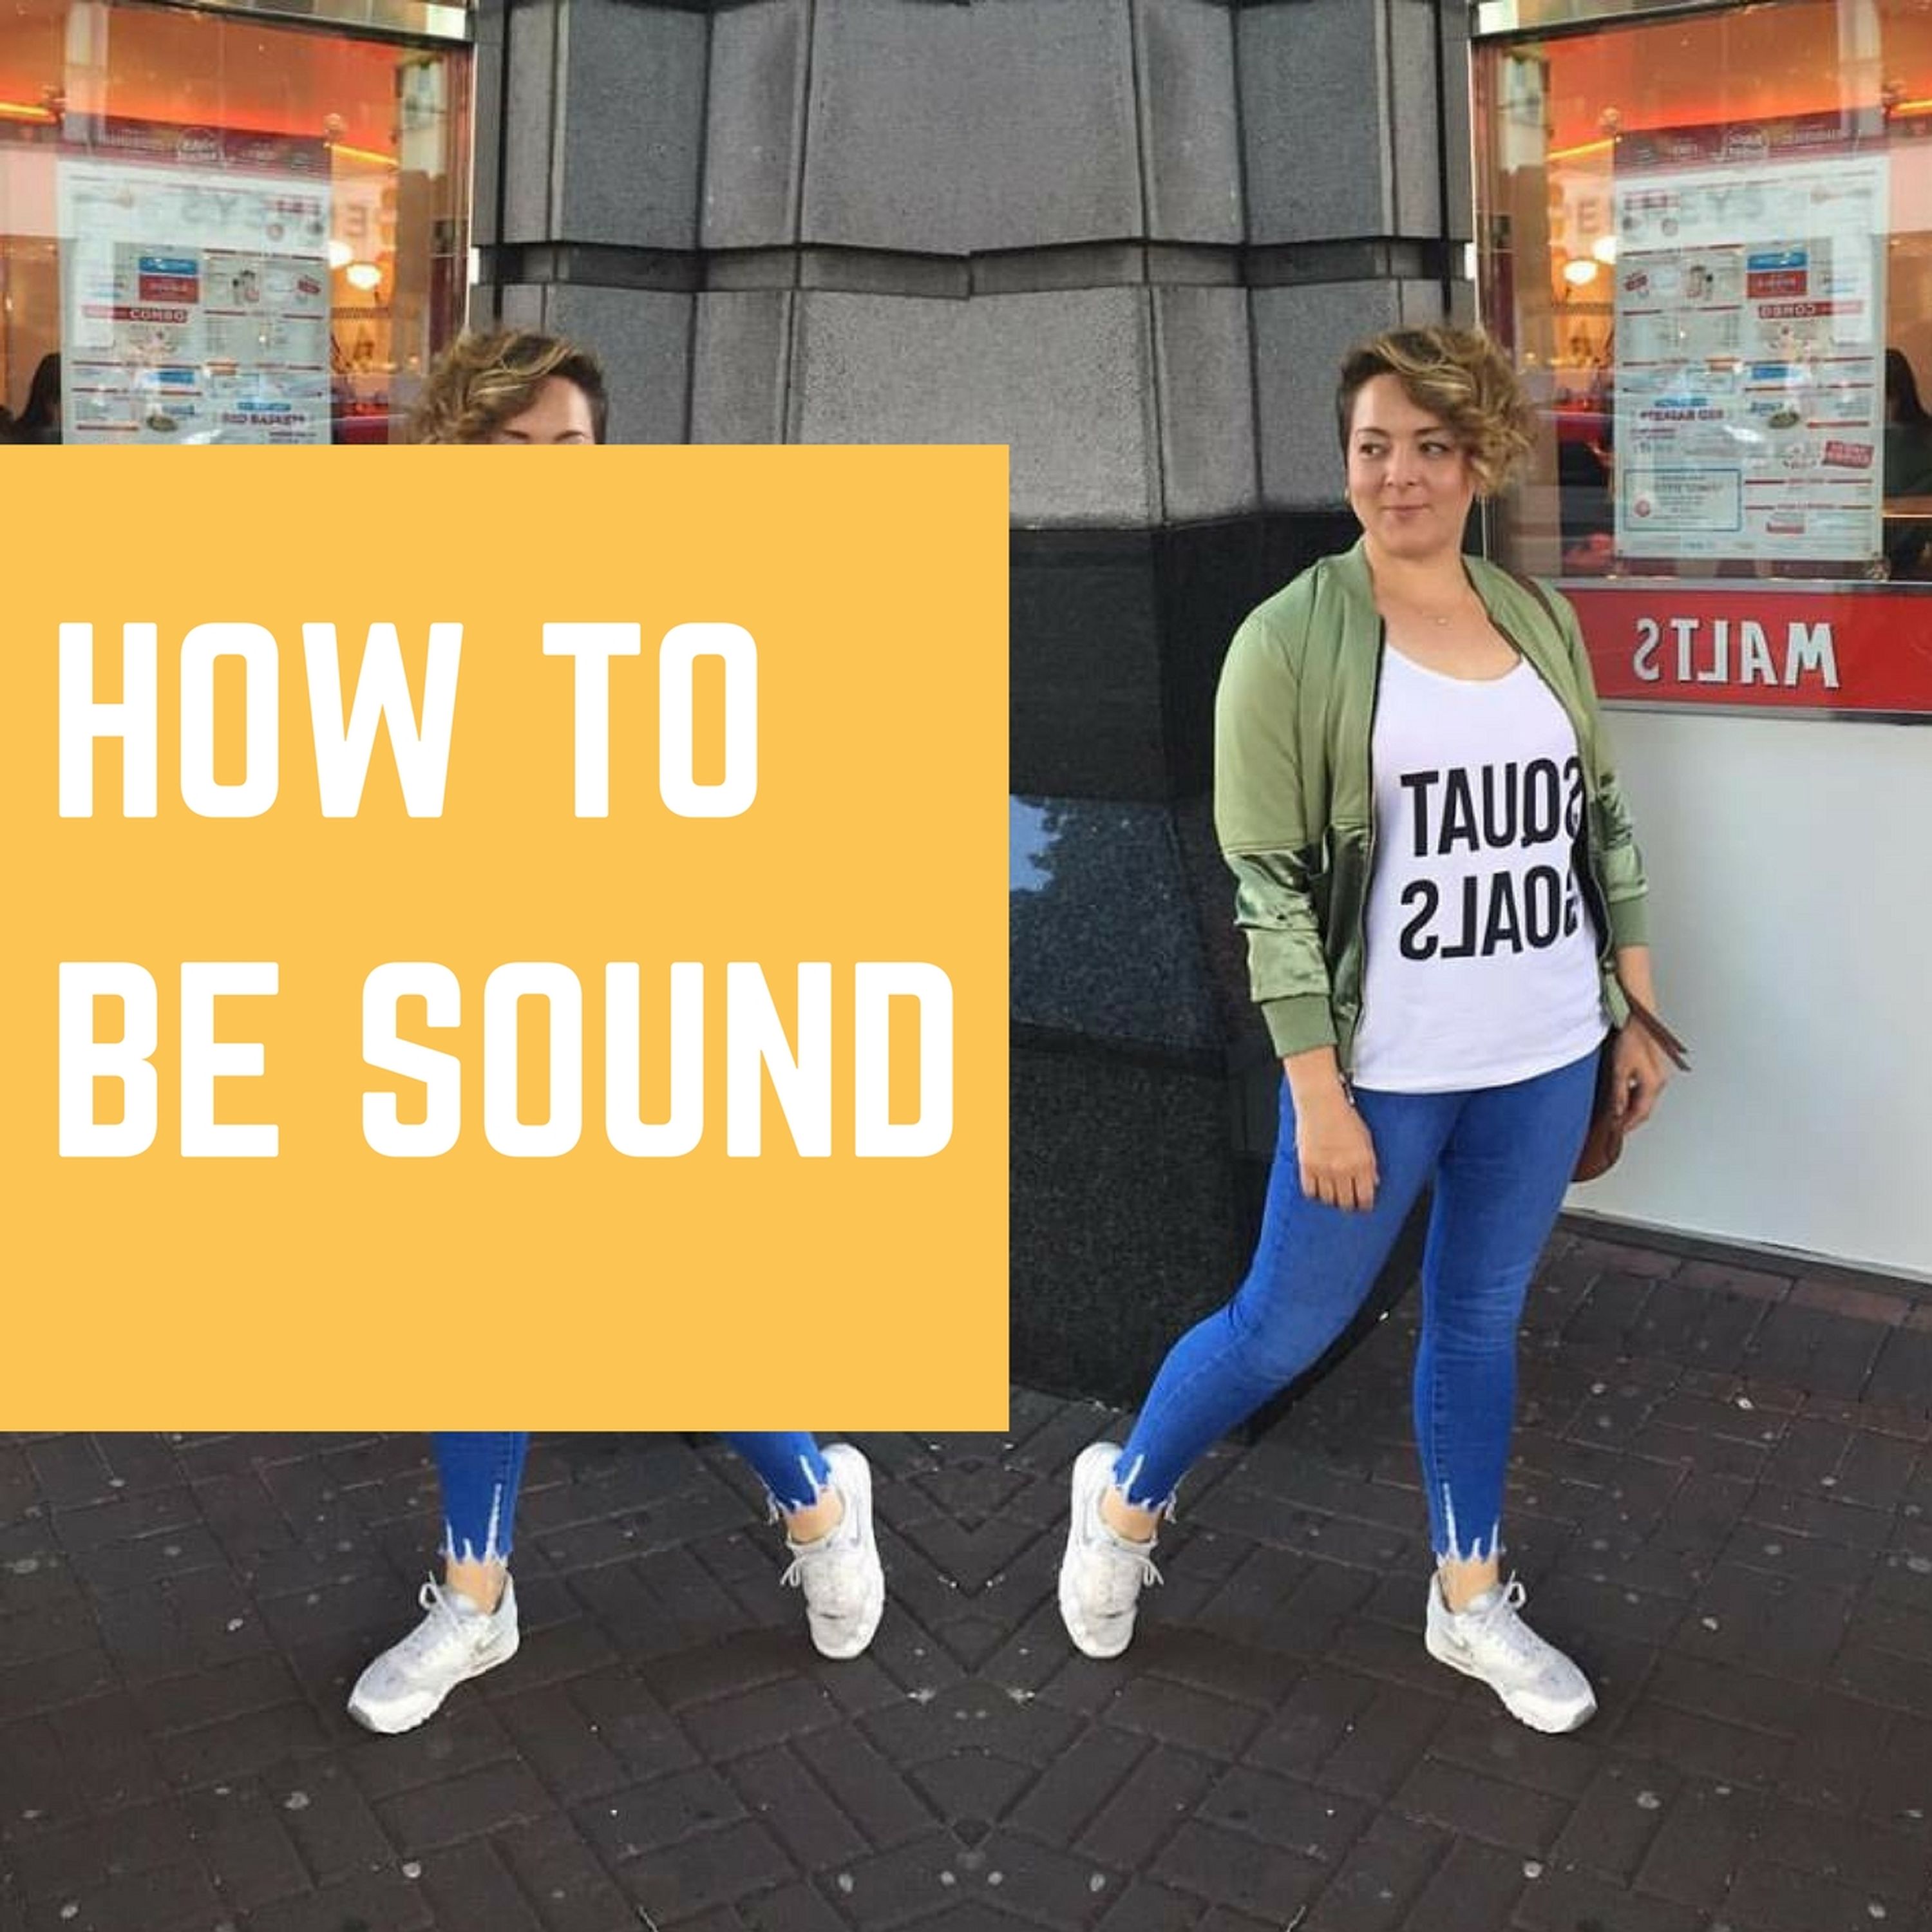 Claire Concannon on how to be sound